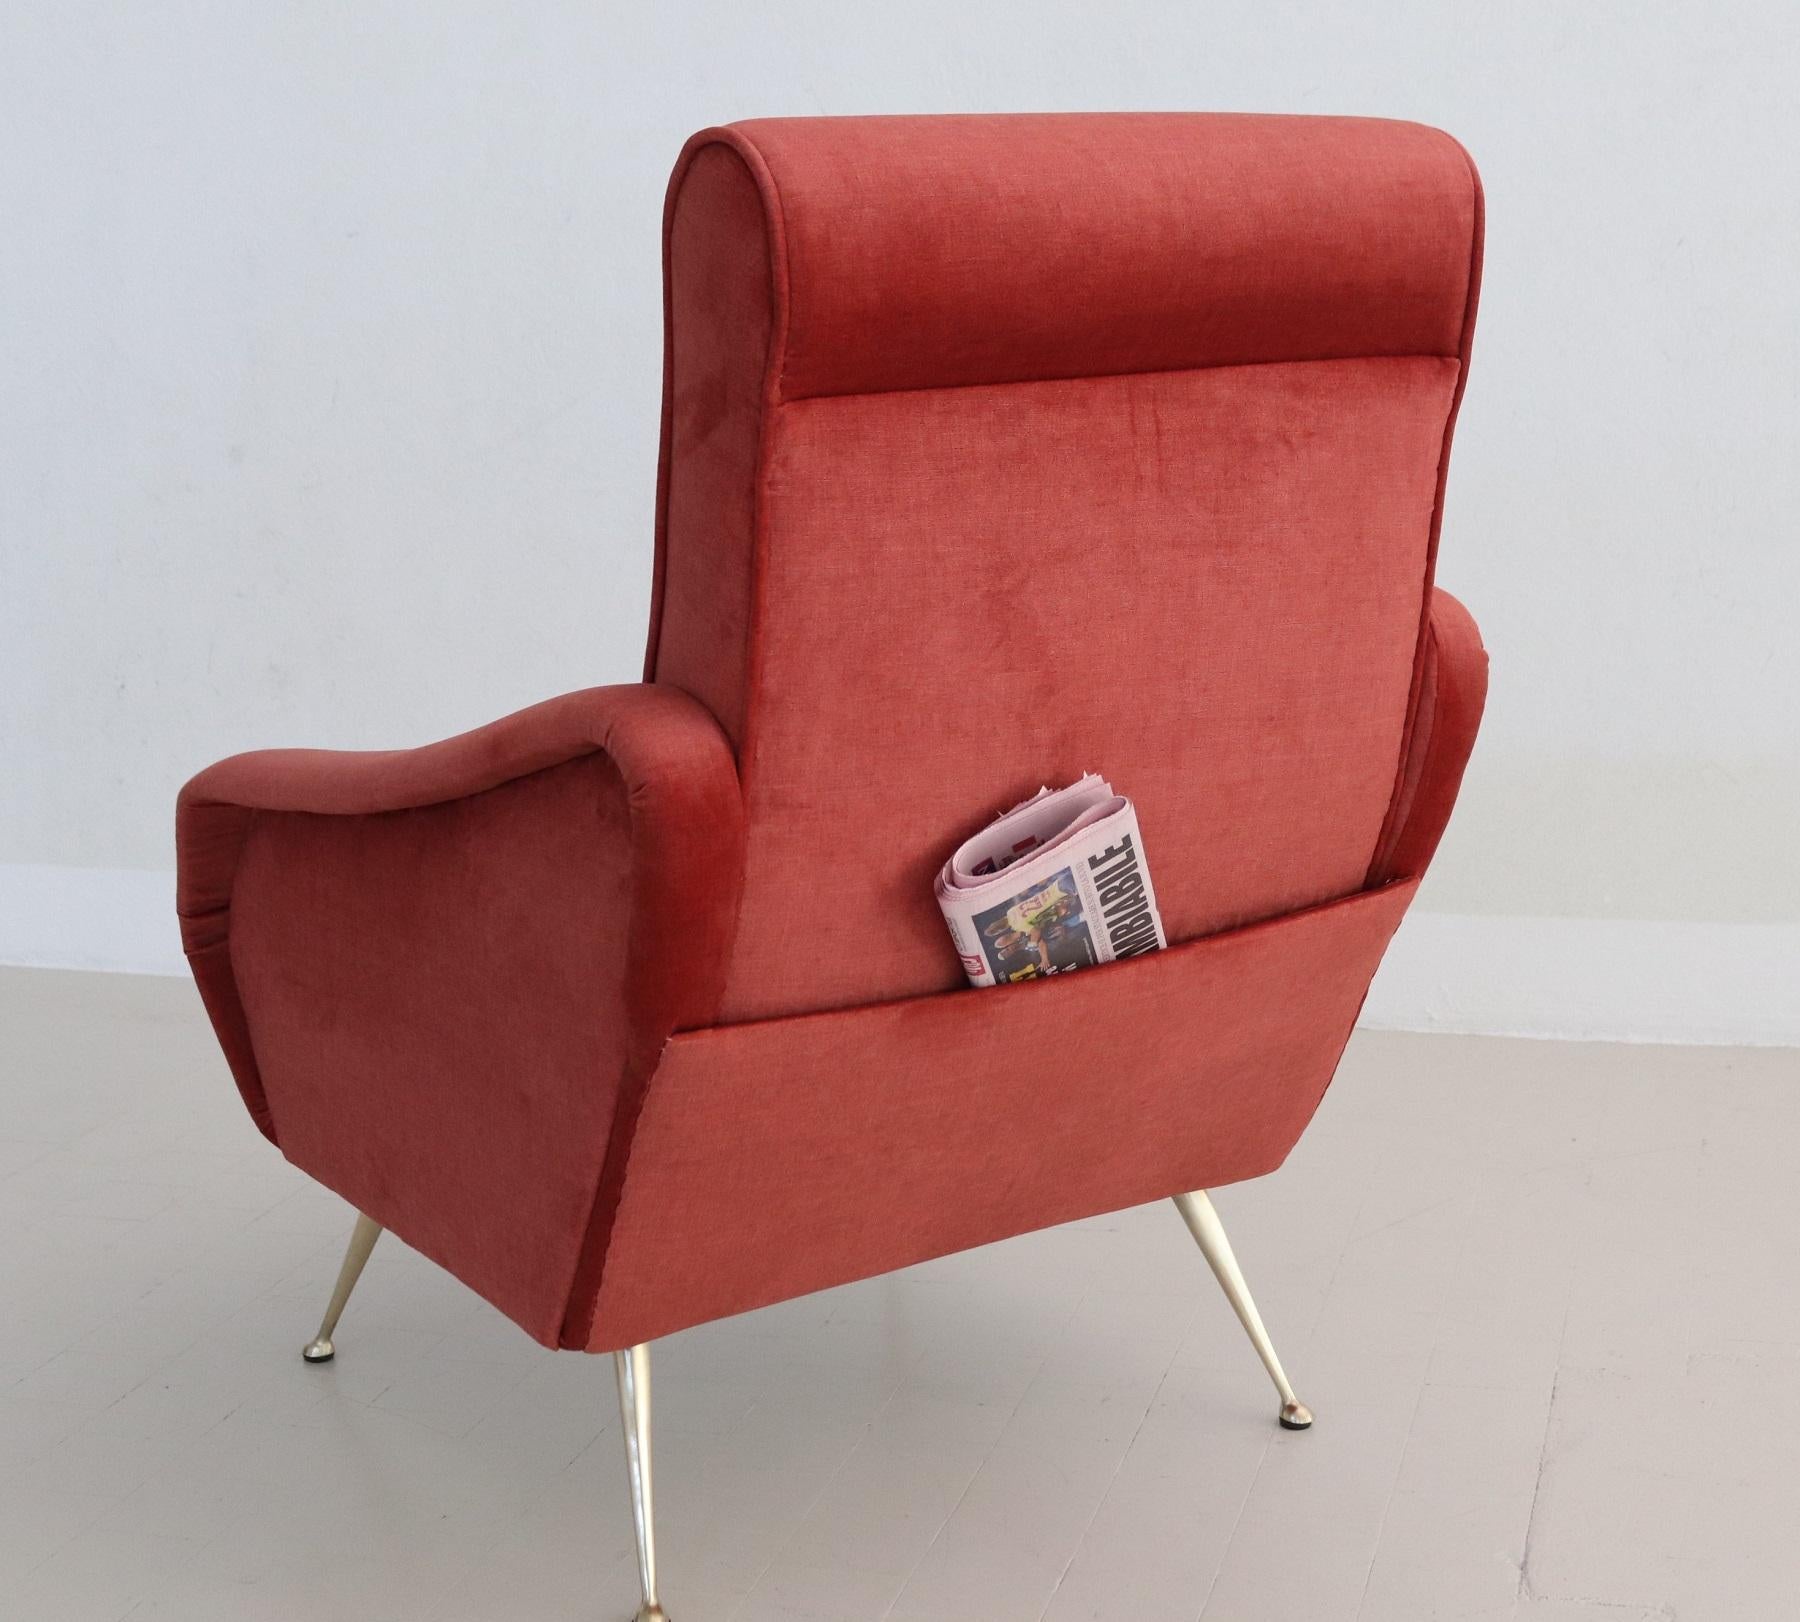 Polished Italian Midcentury Armchair in Lobster Color Velvet and Brass Legs, 1950s